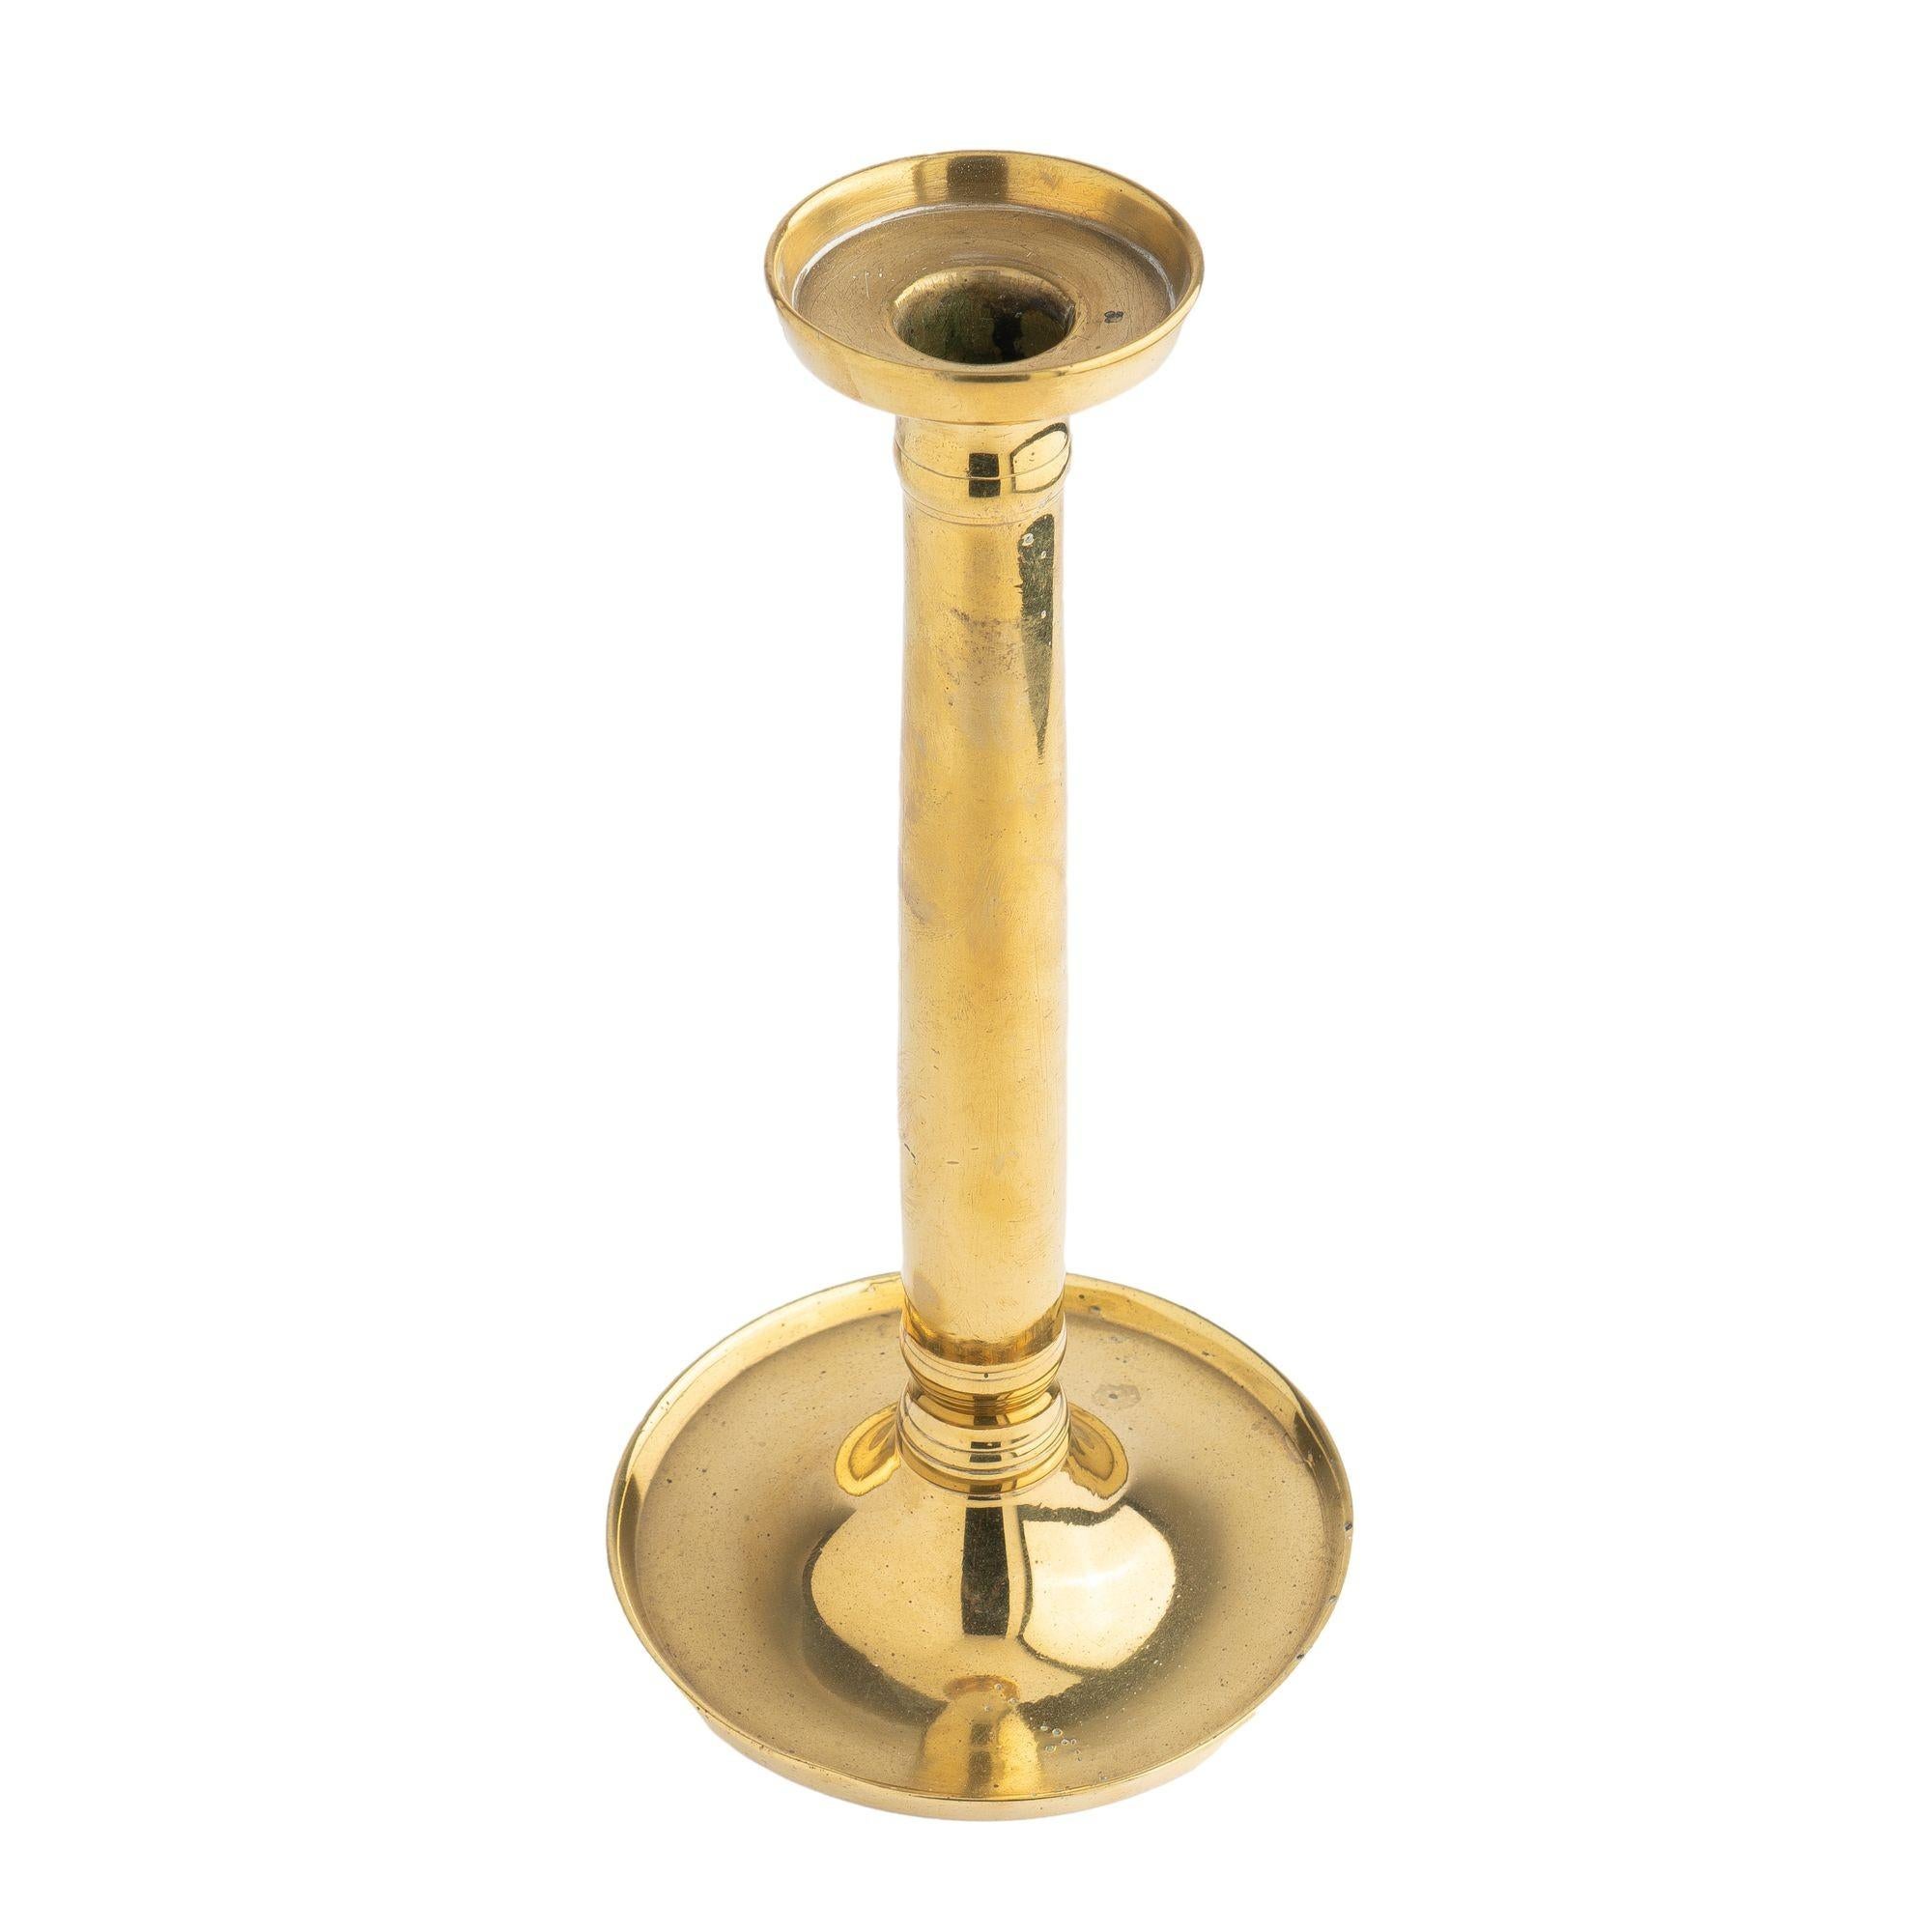 Cast brass columnar candlestick with standing rim bobeshe and circular standing rim base. Seam cast and threaded shaft to base.

France, Restoration period, circa 1815-30.